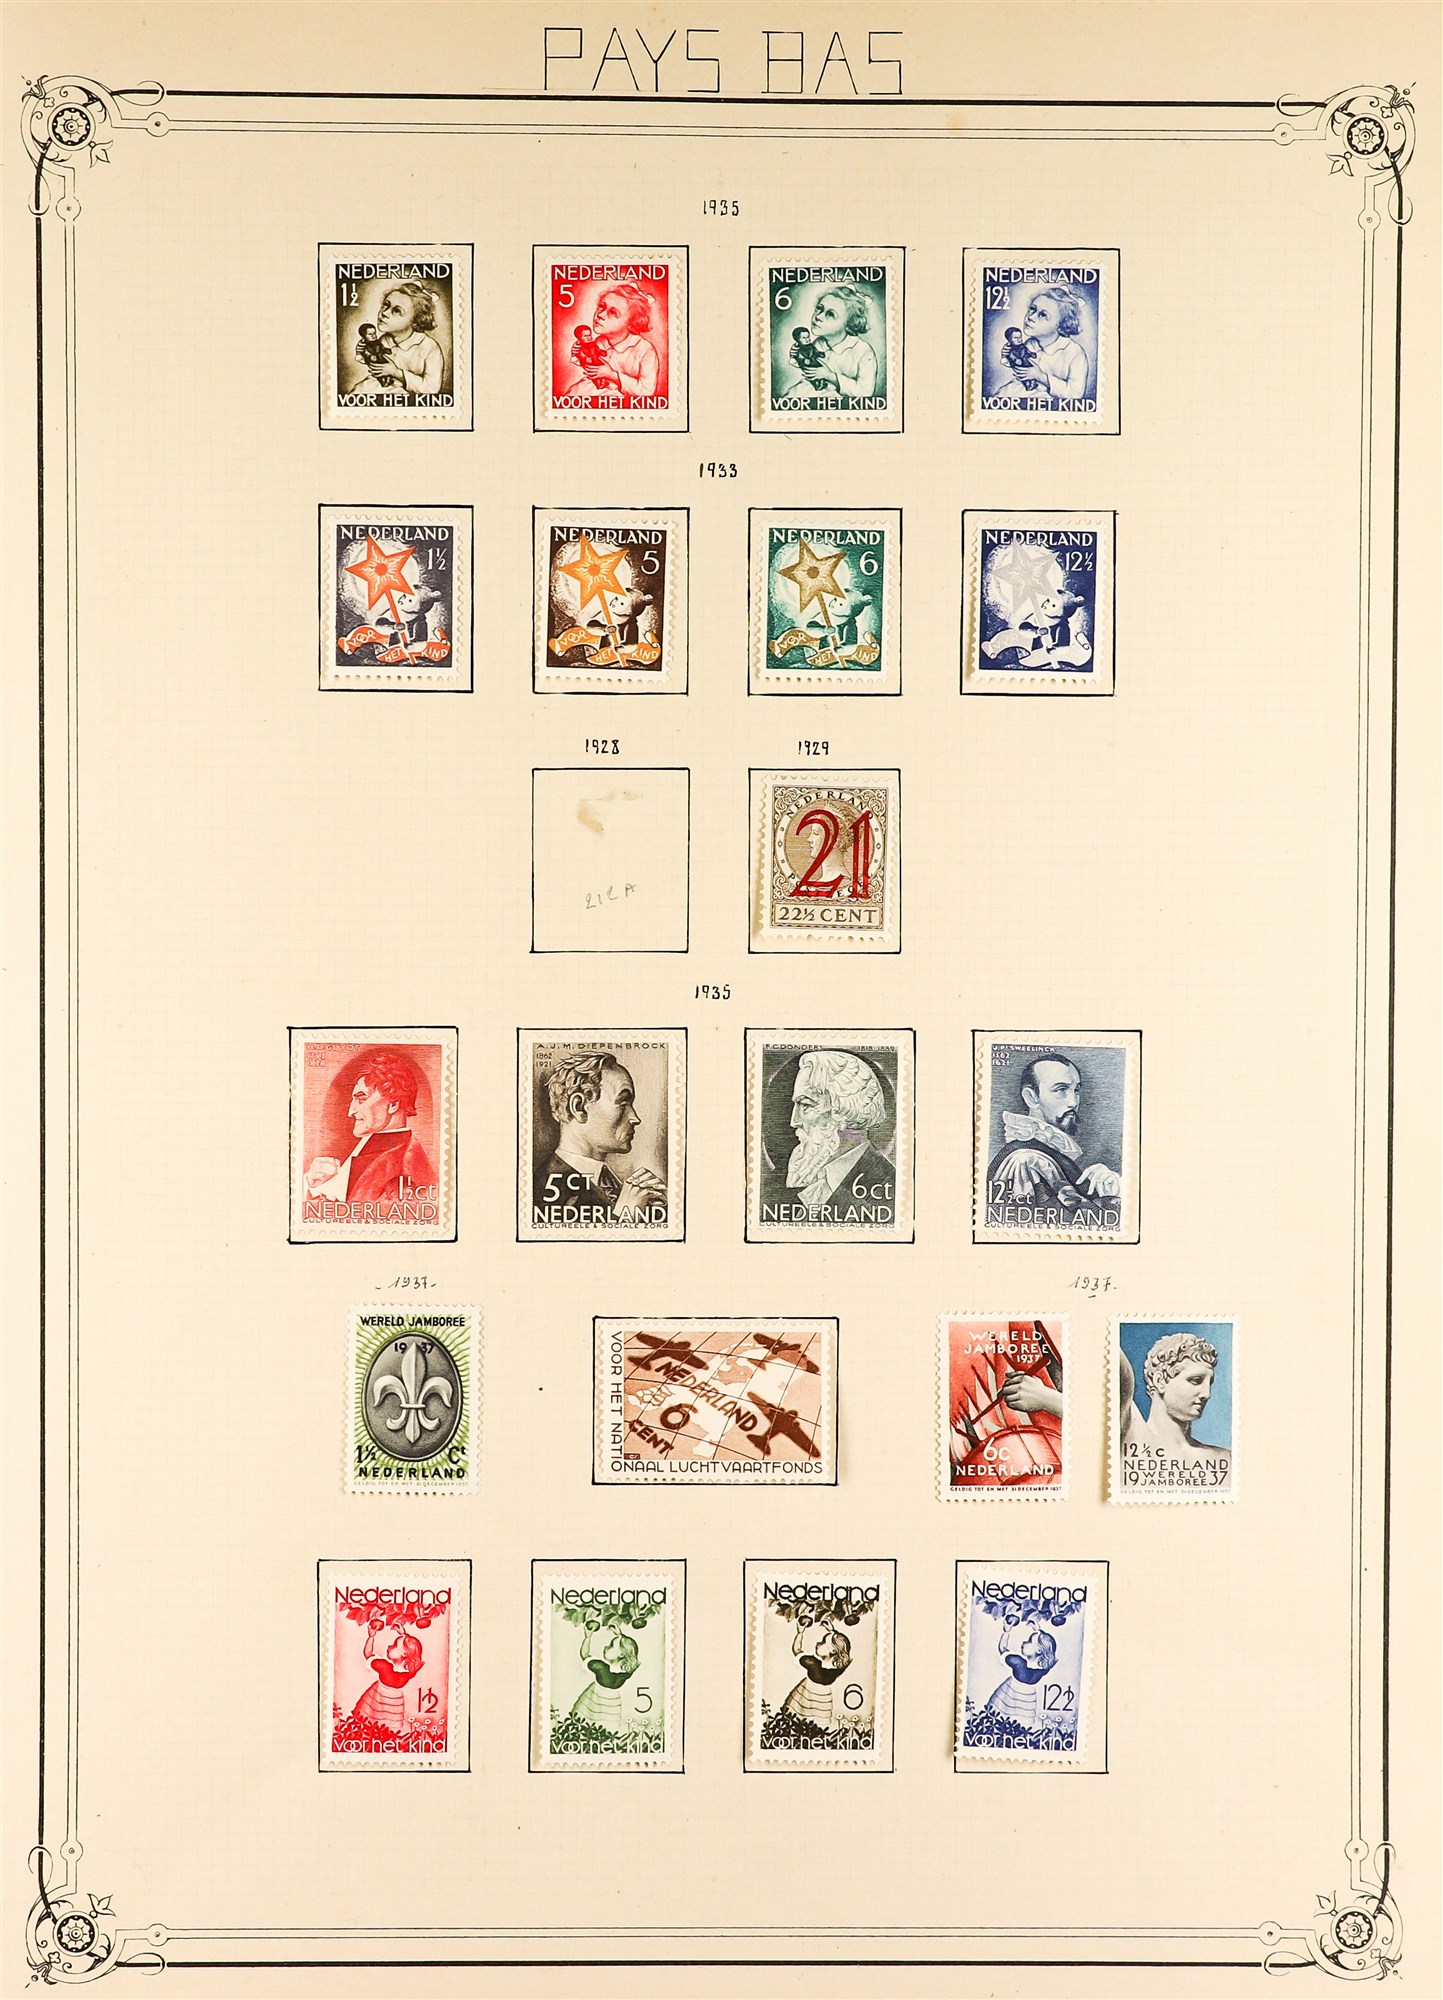 NETHERLANDS 1921 - 1939 MINT SETS collection on album pages, Michel €3000+ (110+ stamps) - Image 5 of 6